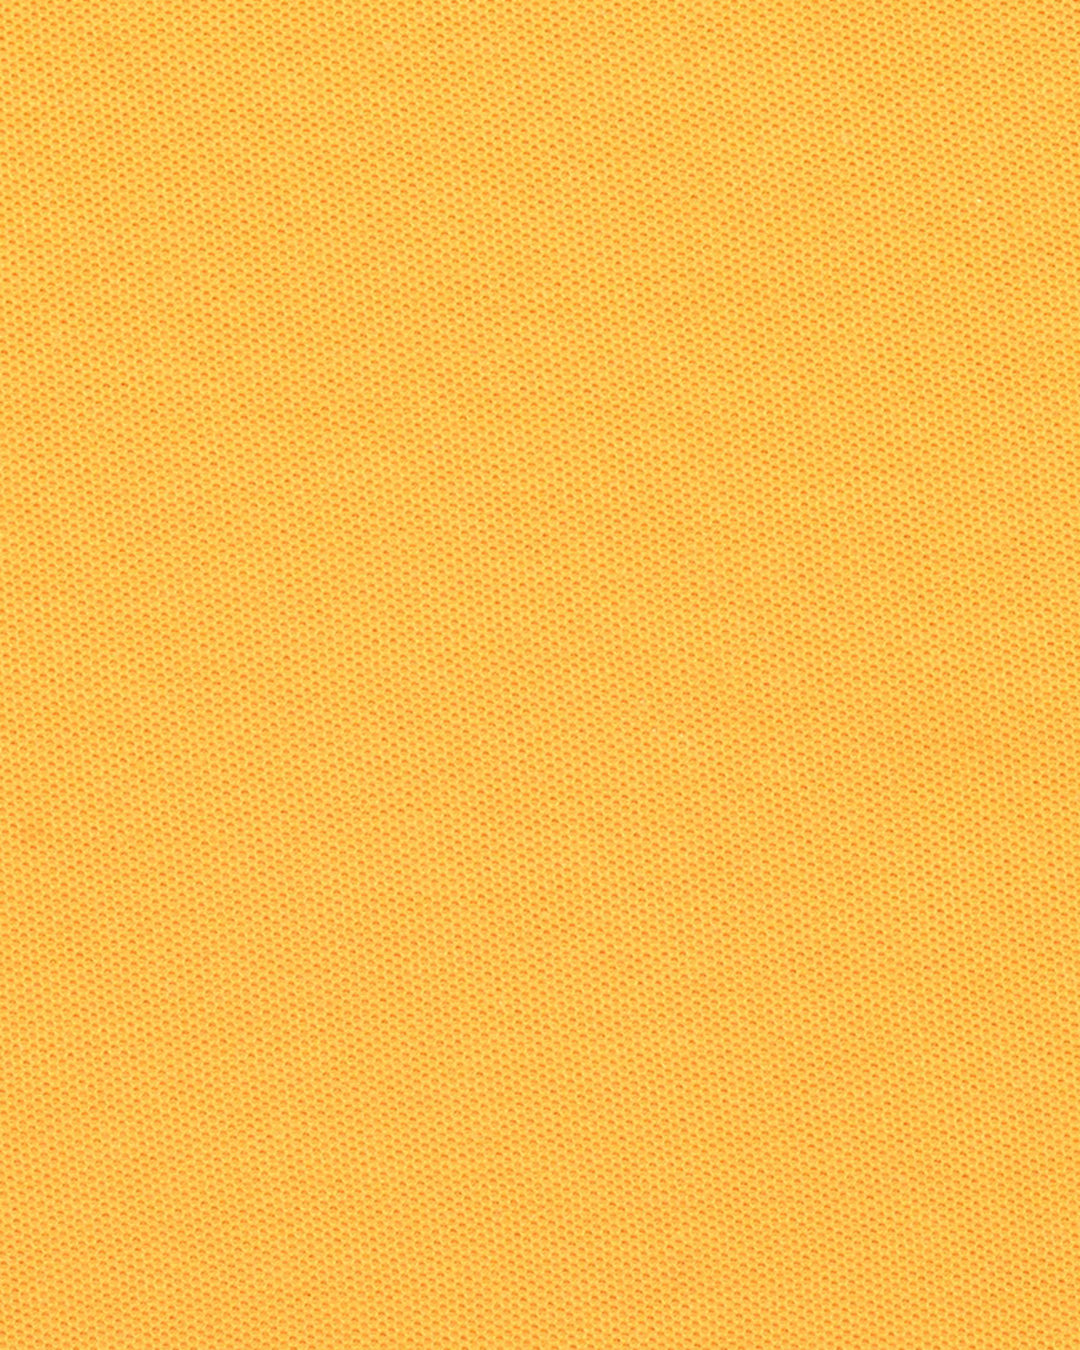 Close up of the custom oxford polo shirt for men by Luxire in golden yellow